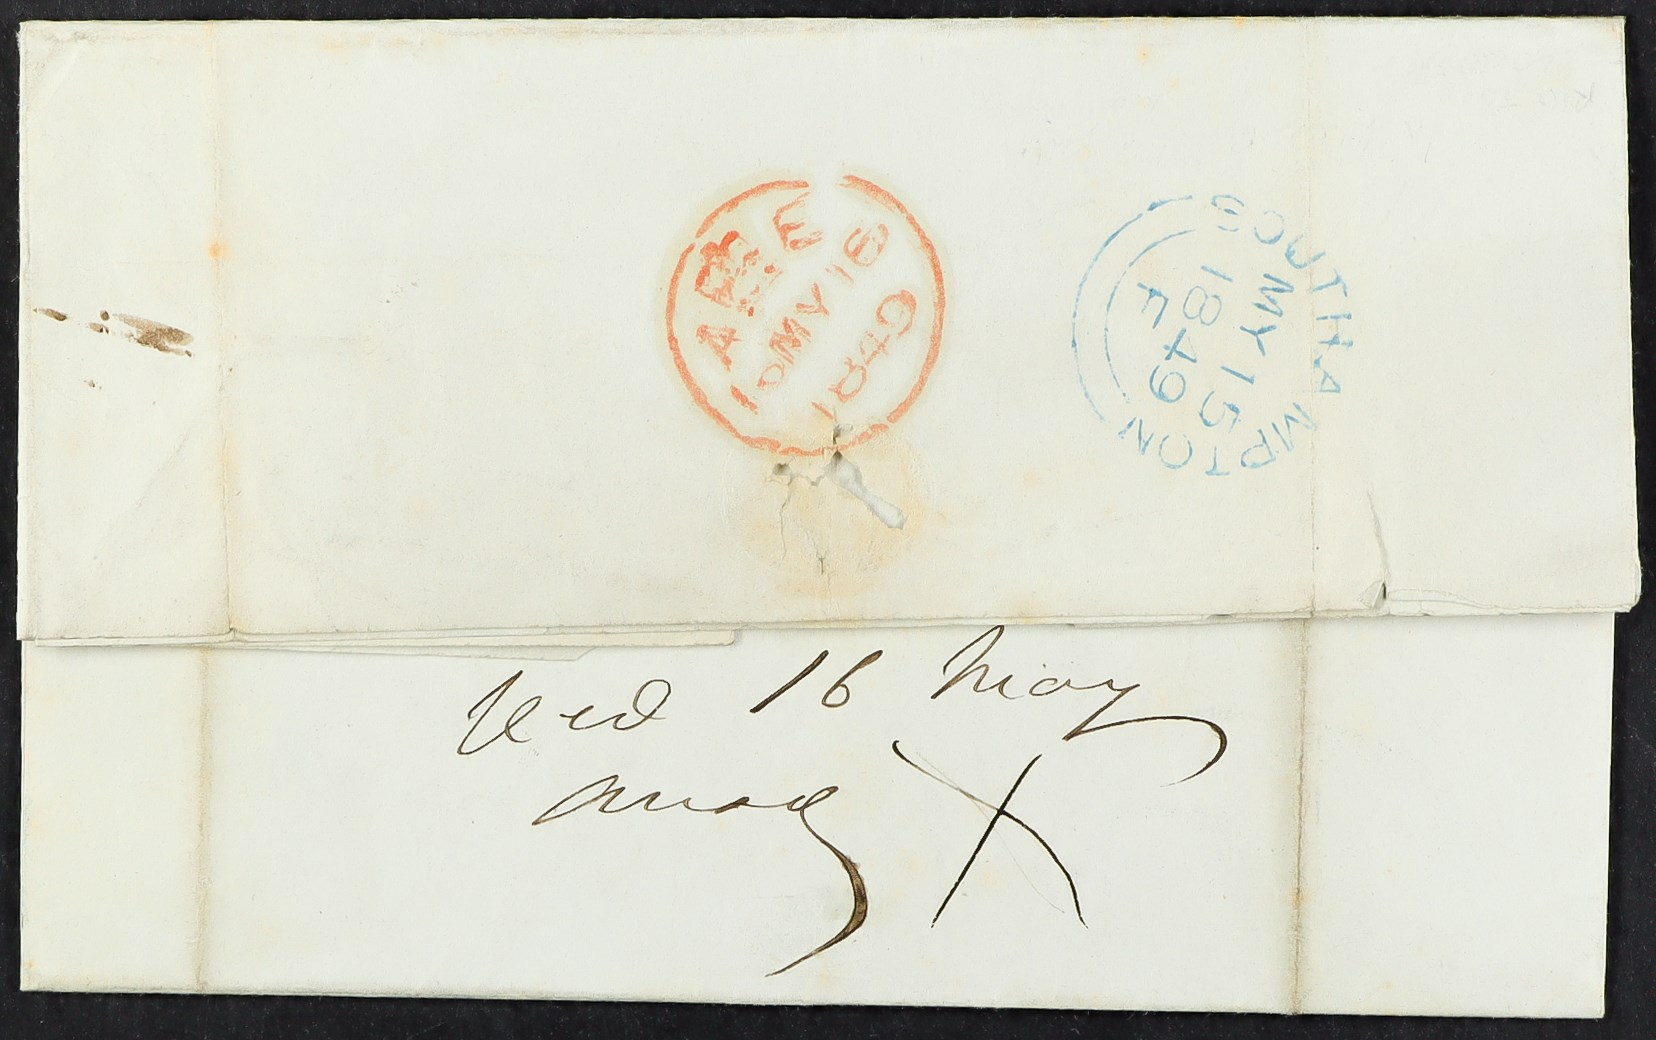 GB. COVERS & POSTAL HISTORY 1849 (12th March) a letter charged ‘2/-’ from Rio de Janeiro, Brazil, to - Image 2 of 4